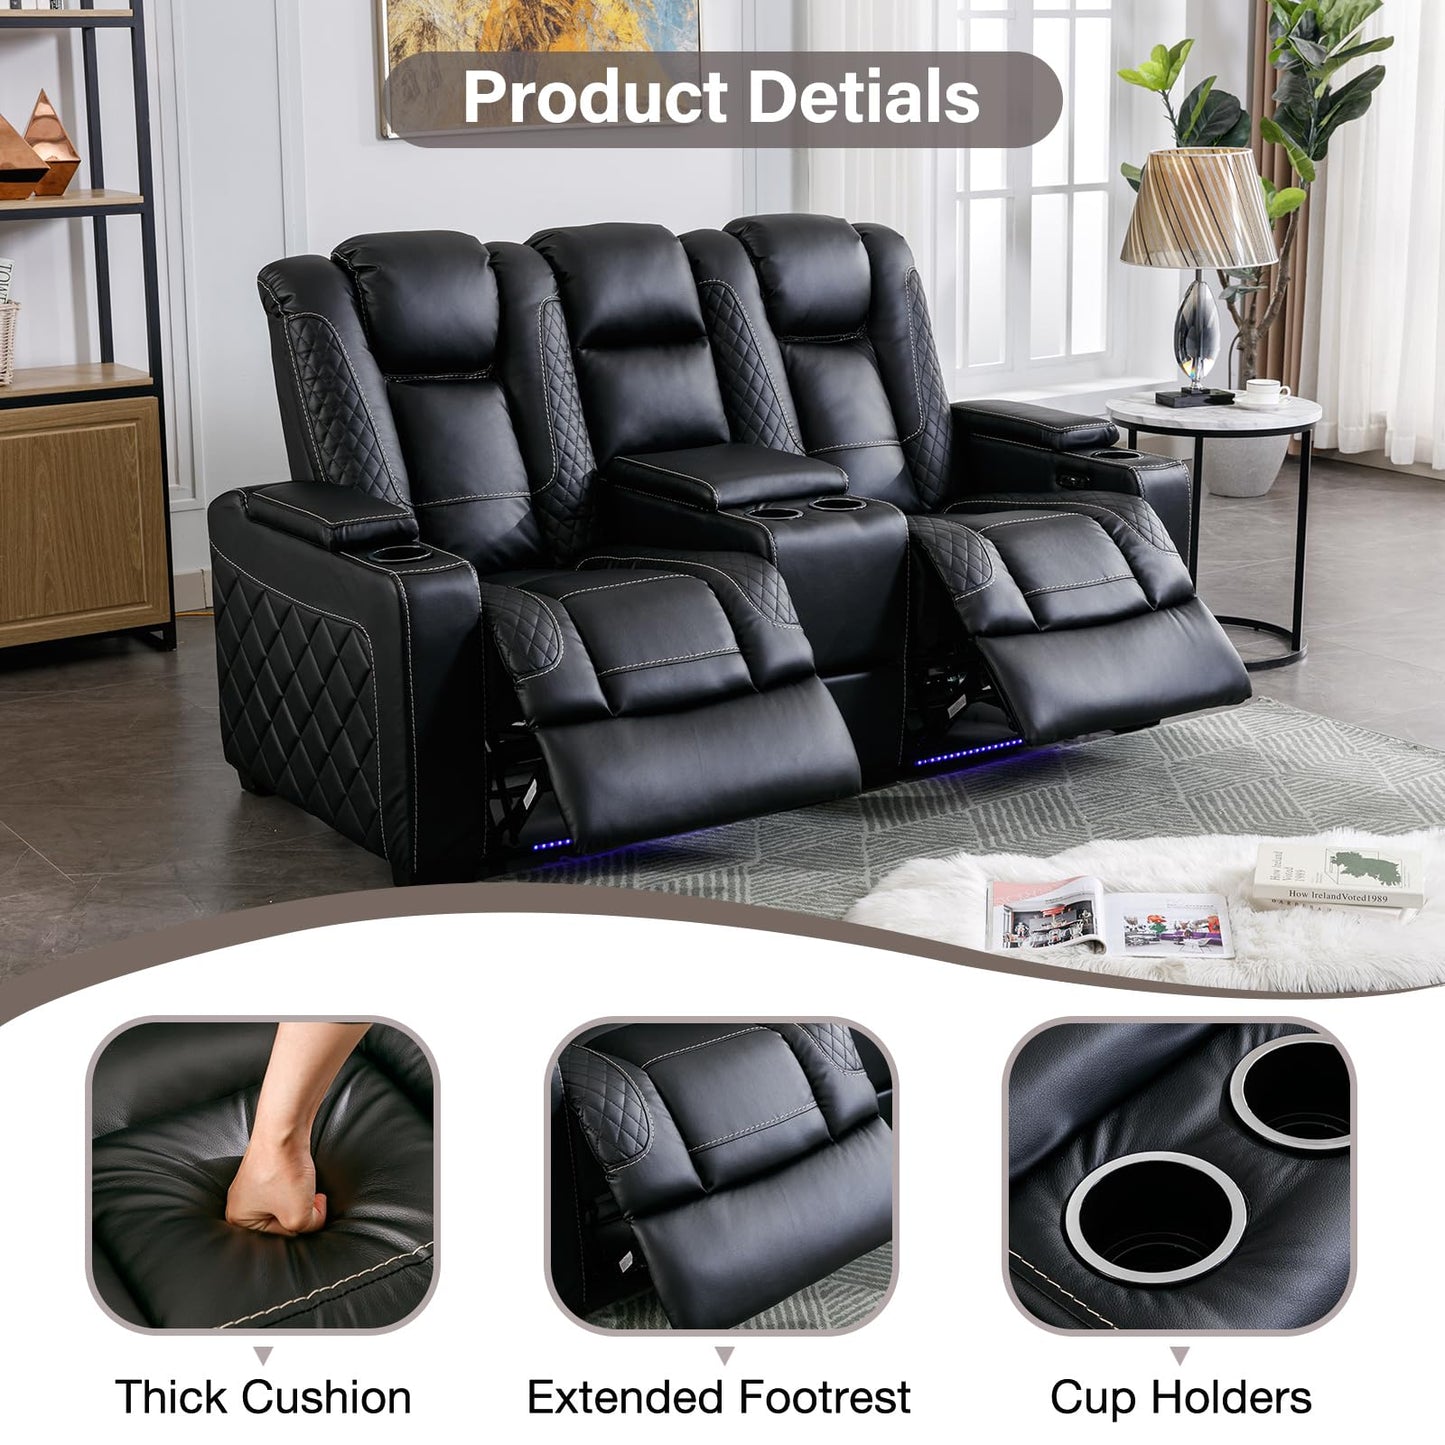 EBELLO Home Theater Seating with Ambient Lighting, Electric Power Loveseat Recliner with Adjustable Headrest, Faux Leather Dual Recliner with Hidden Arm Storage, USB Ports and Cup Holders, Black